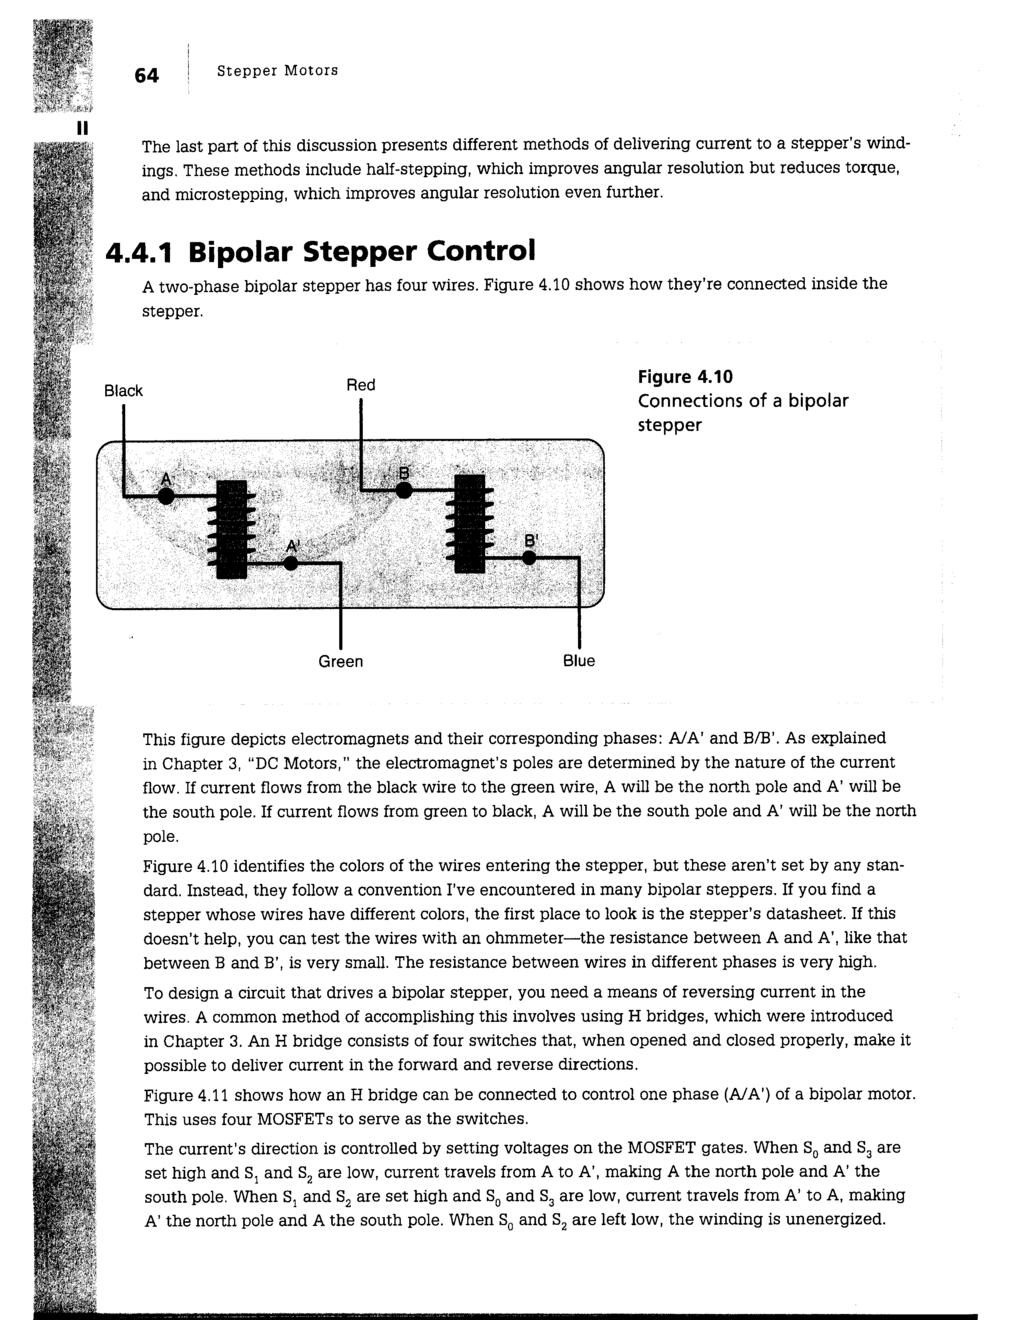 64 Stepper Motors II The last part of this discussion presents different methods of delivering current to a stepper's windings.